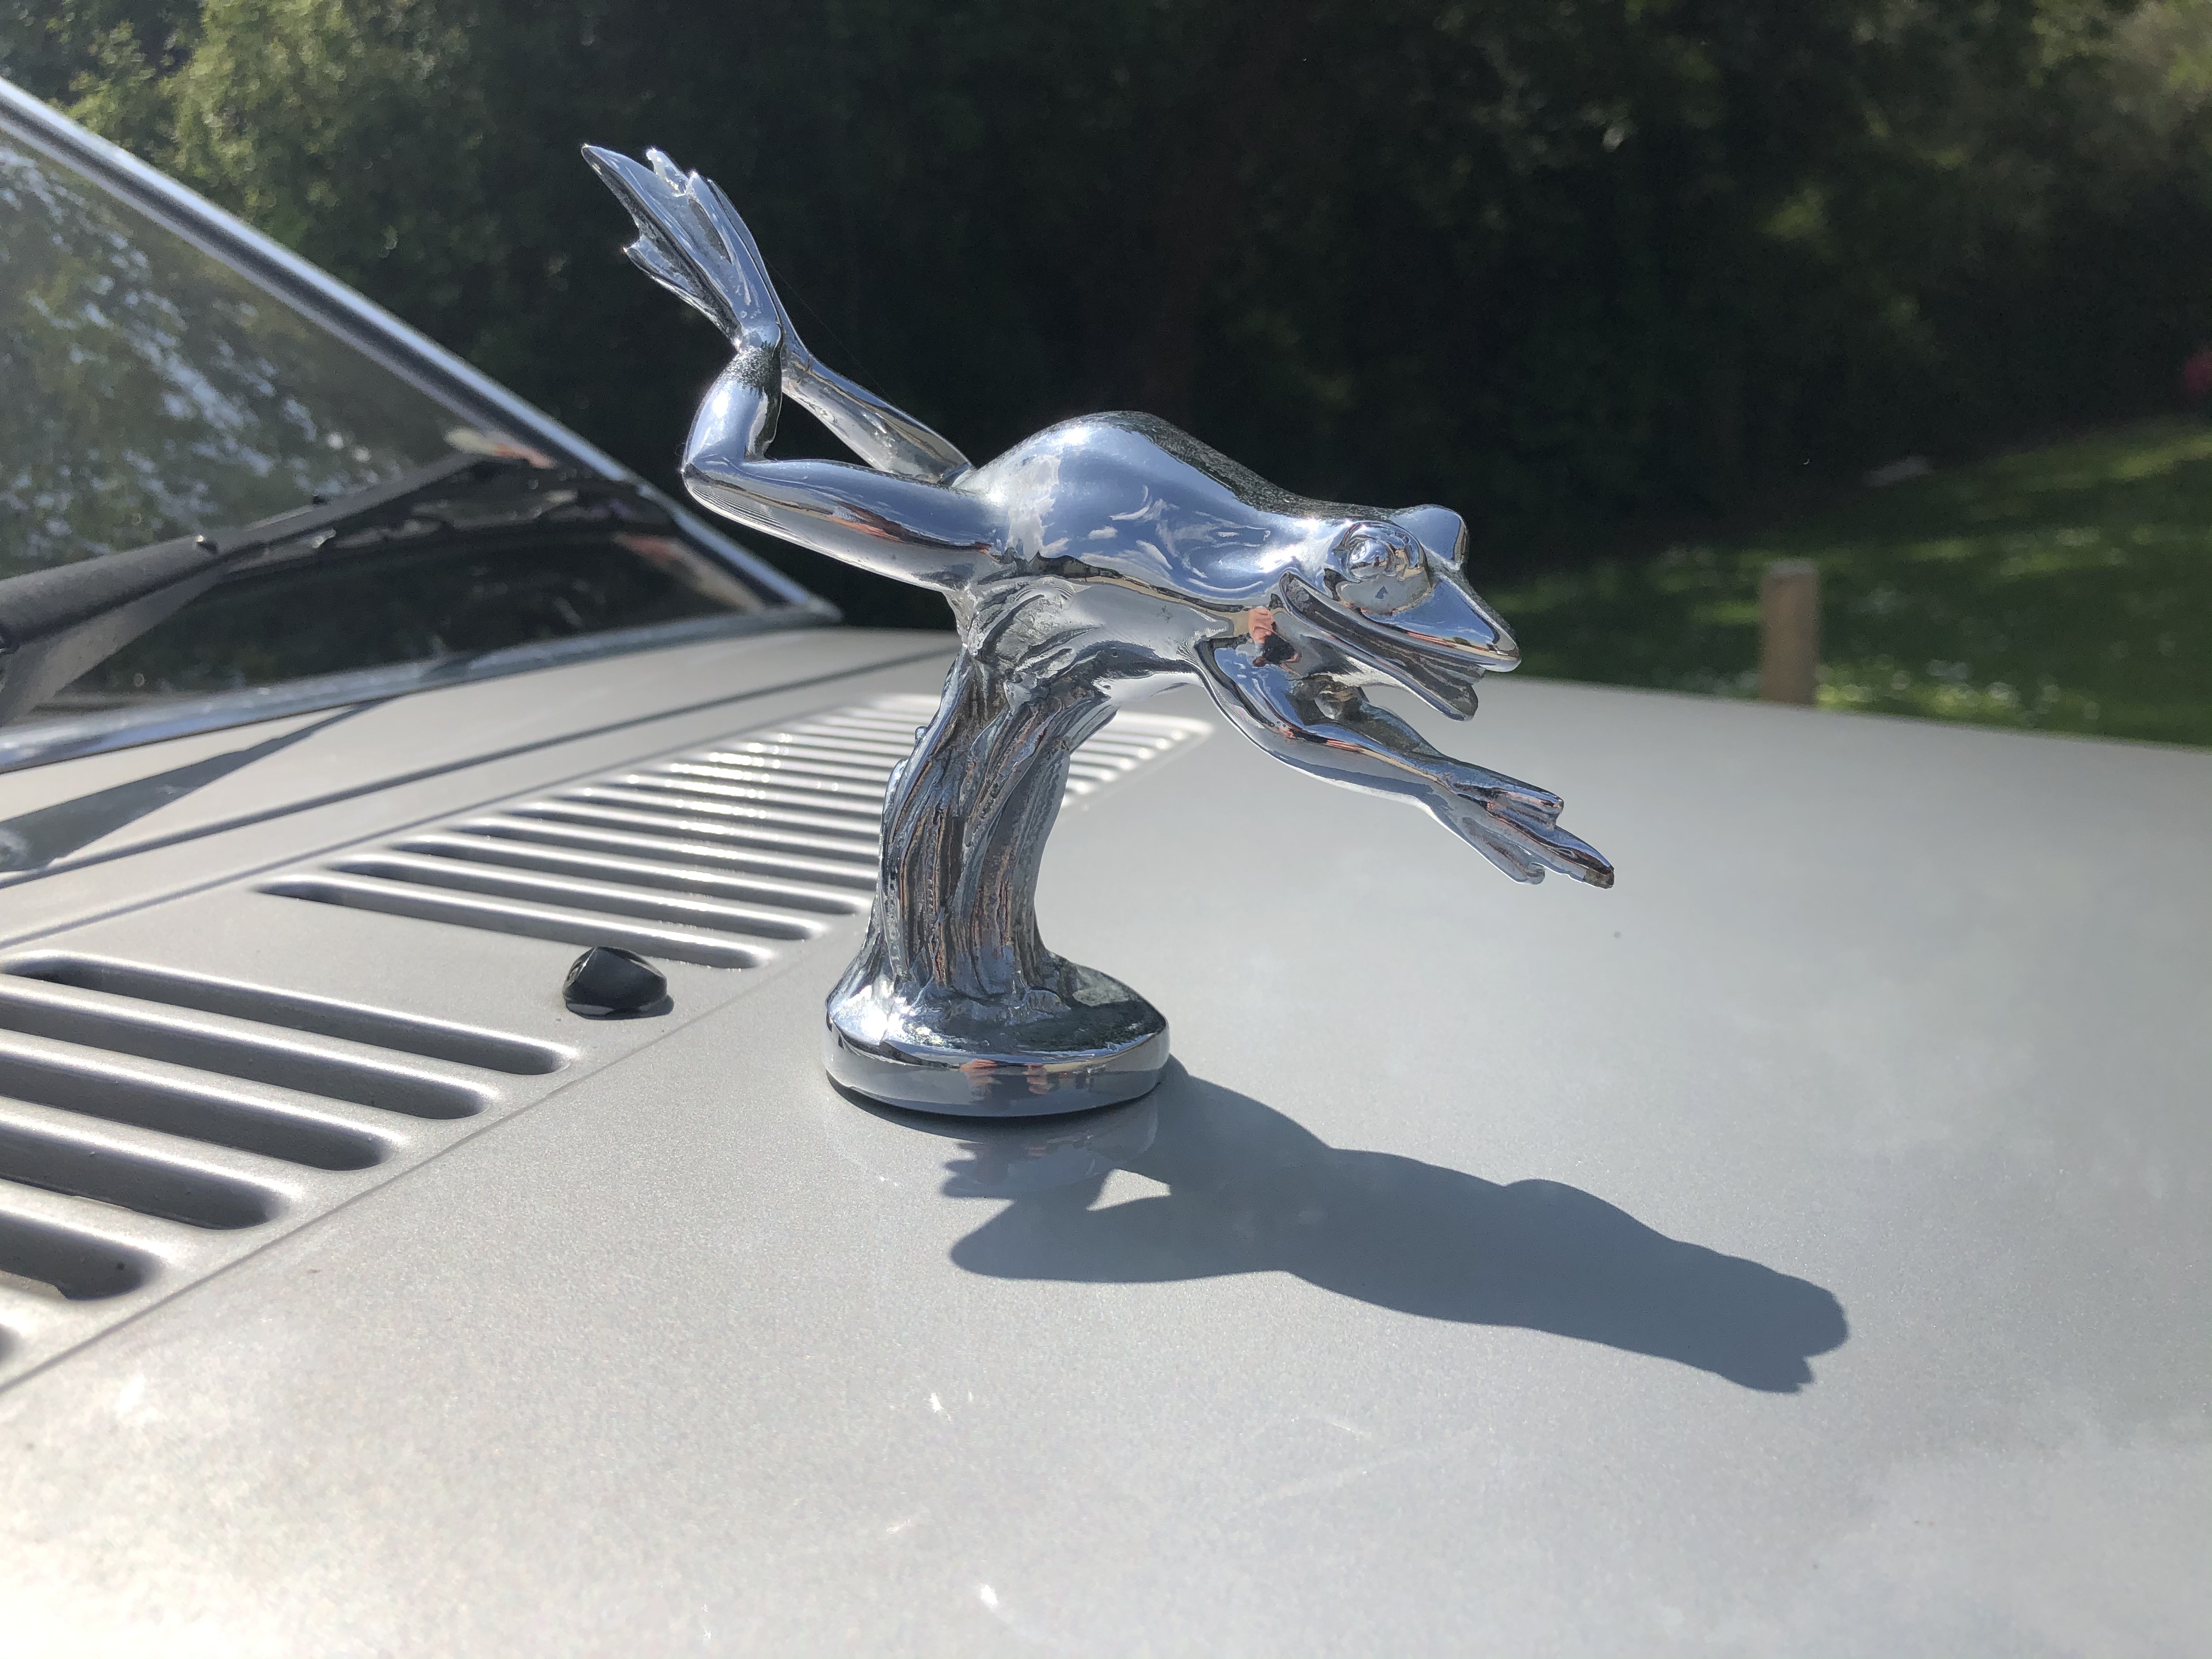 The car's silver frog mascot on the bonnet 